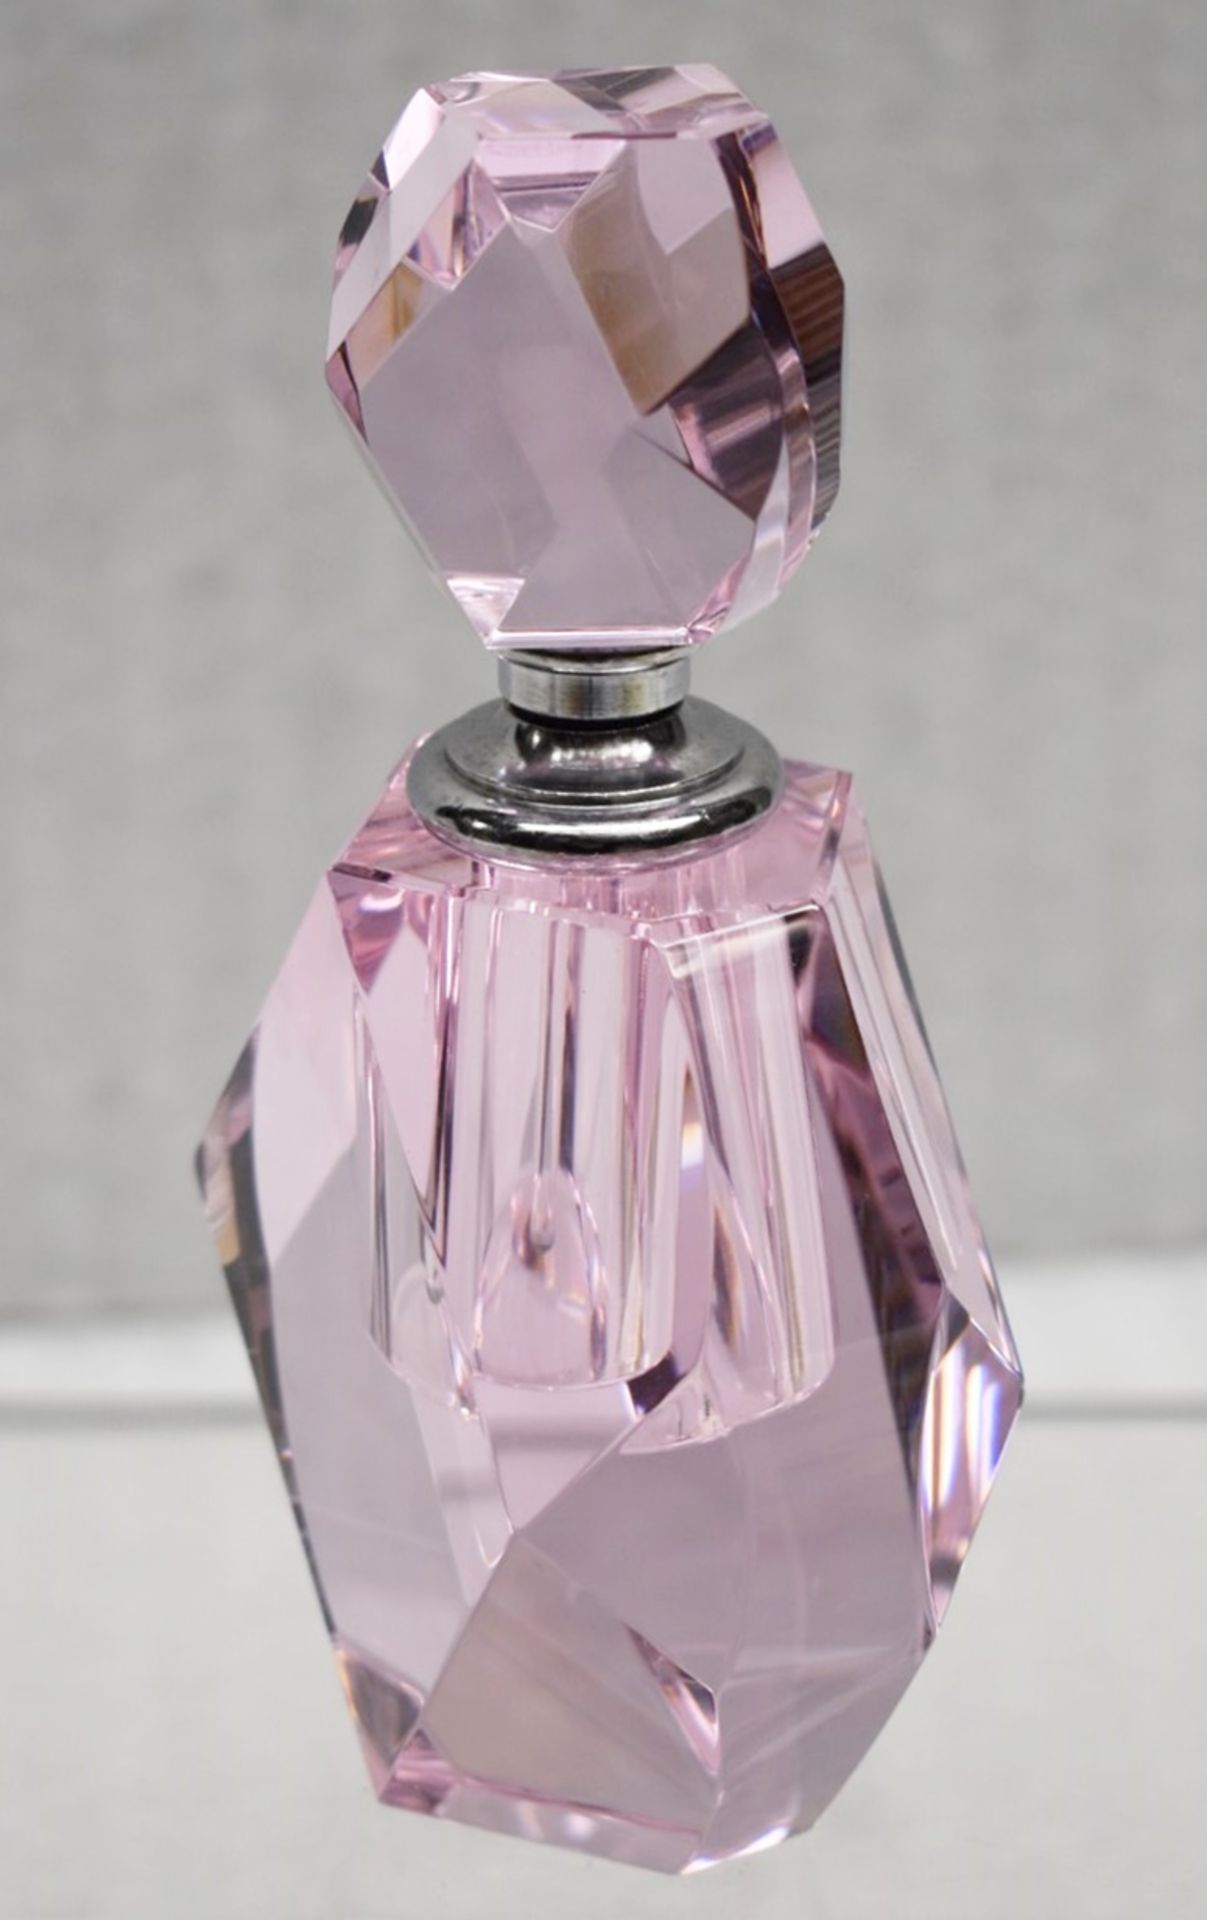 2 x Vintage-Style Cut Glass Perfume Bottles In Purple / Pink - Image 3 of 5